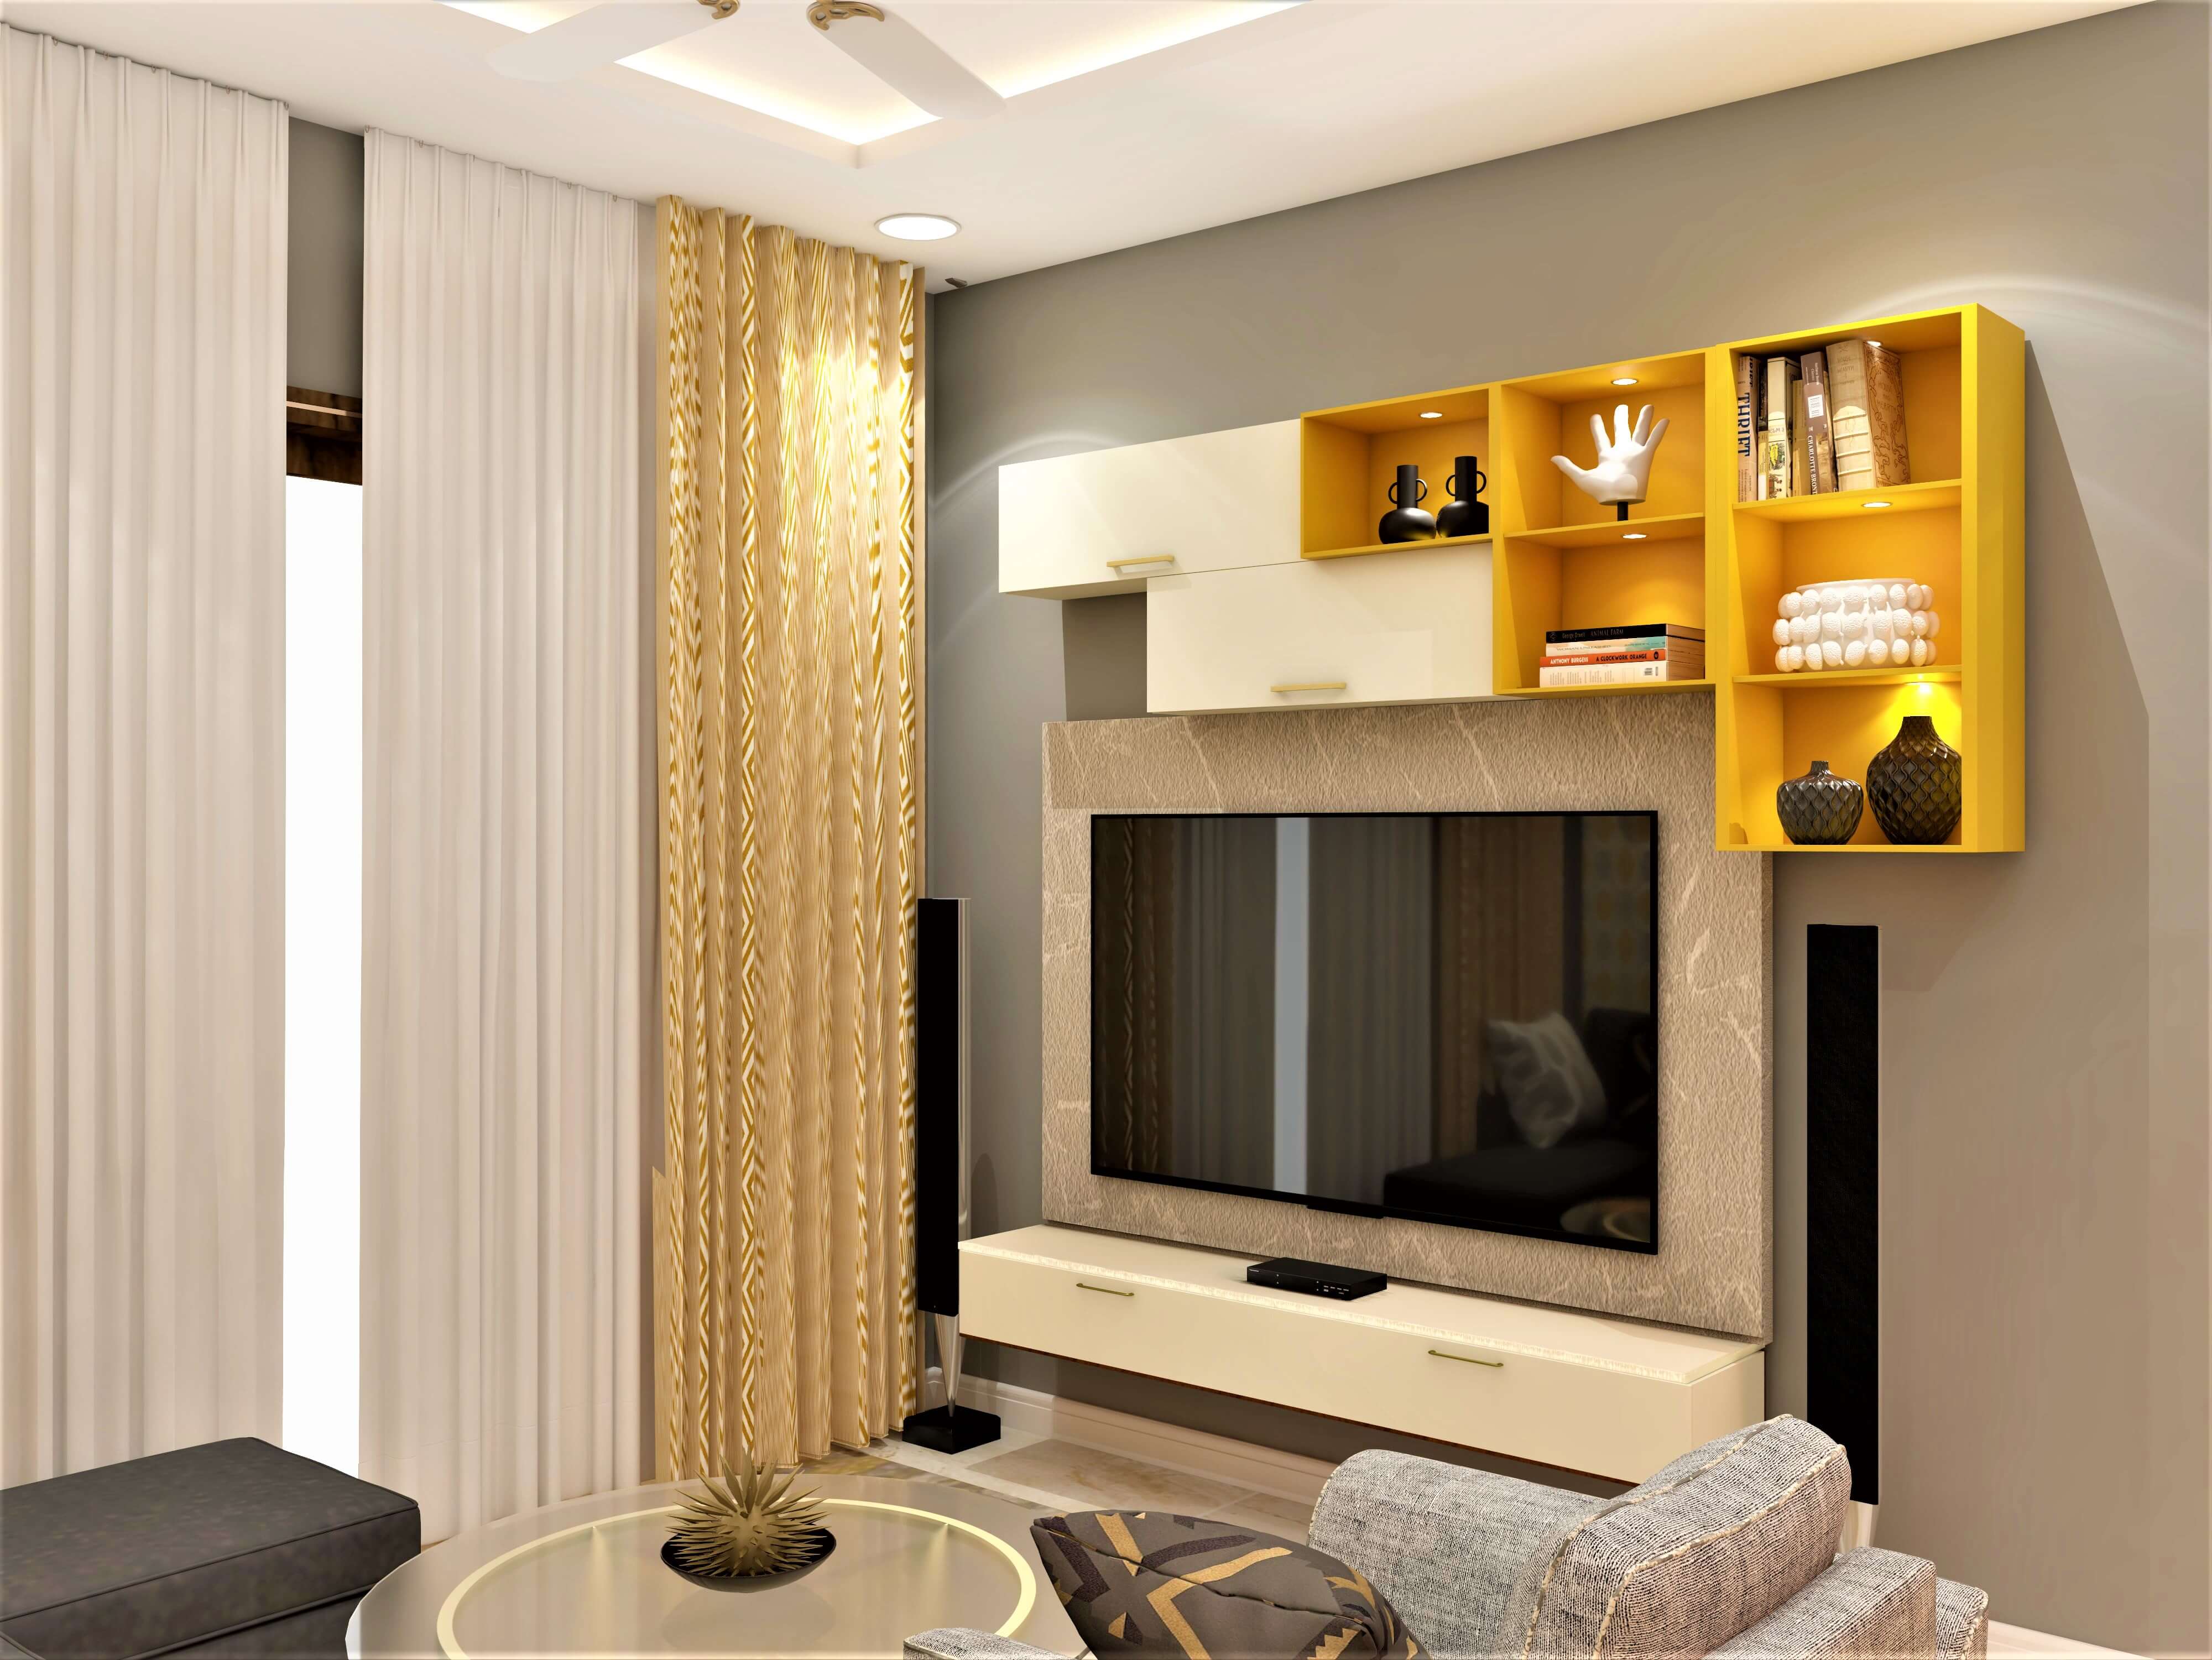 Modern living room design with wall trims - Beautiful Homes